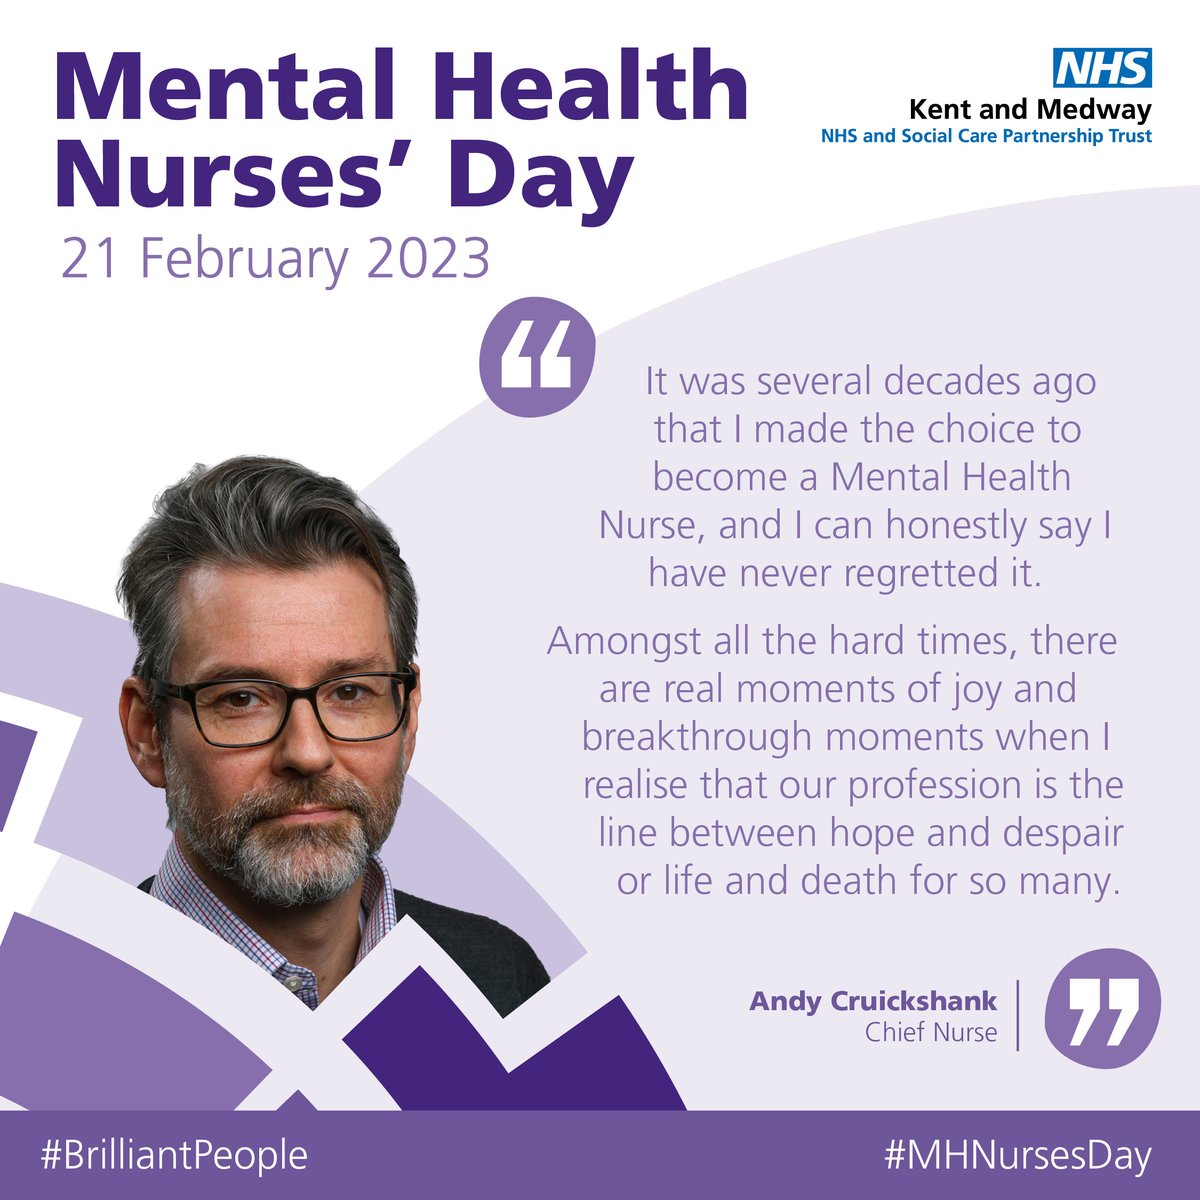 Our nurses are integral in helping KMPT provide brilliant mental health services. Today is #MentalHealthNursesDay and we want to thank our registered mental health nurses for their outstanding service to #KMPT and the #NHS. Wishing you a very happy Mental Health Nurses’ Day!